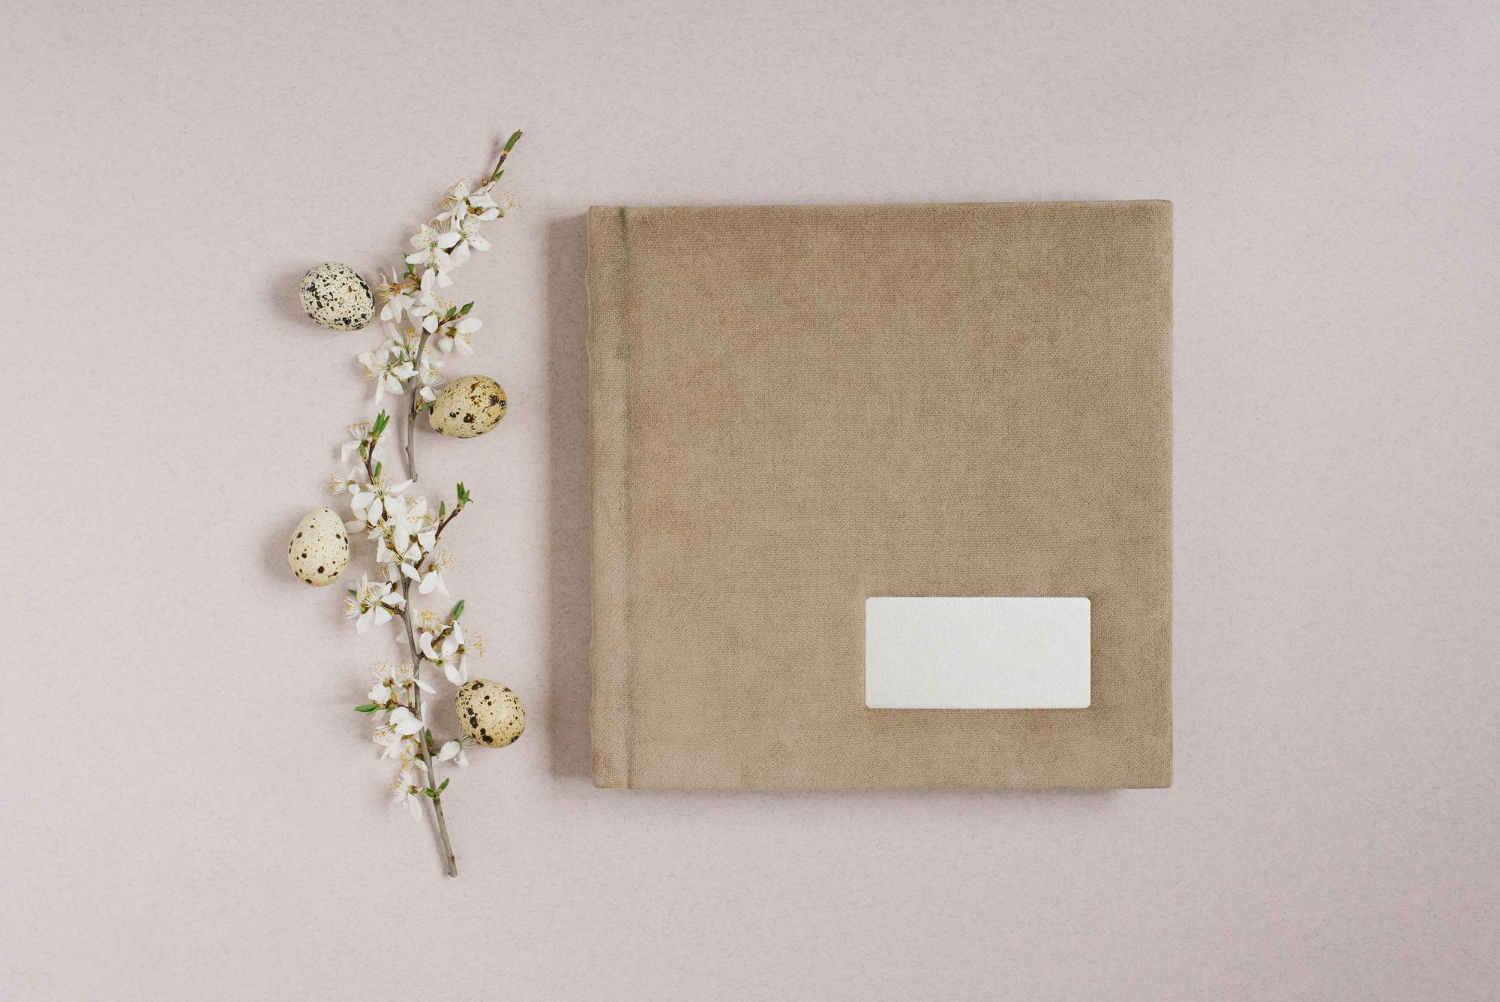 beige girl's diary book with metal frame inscription and spring